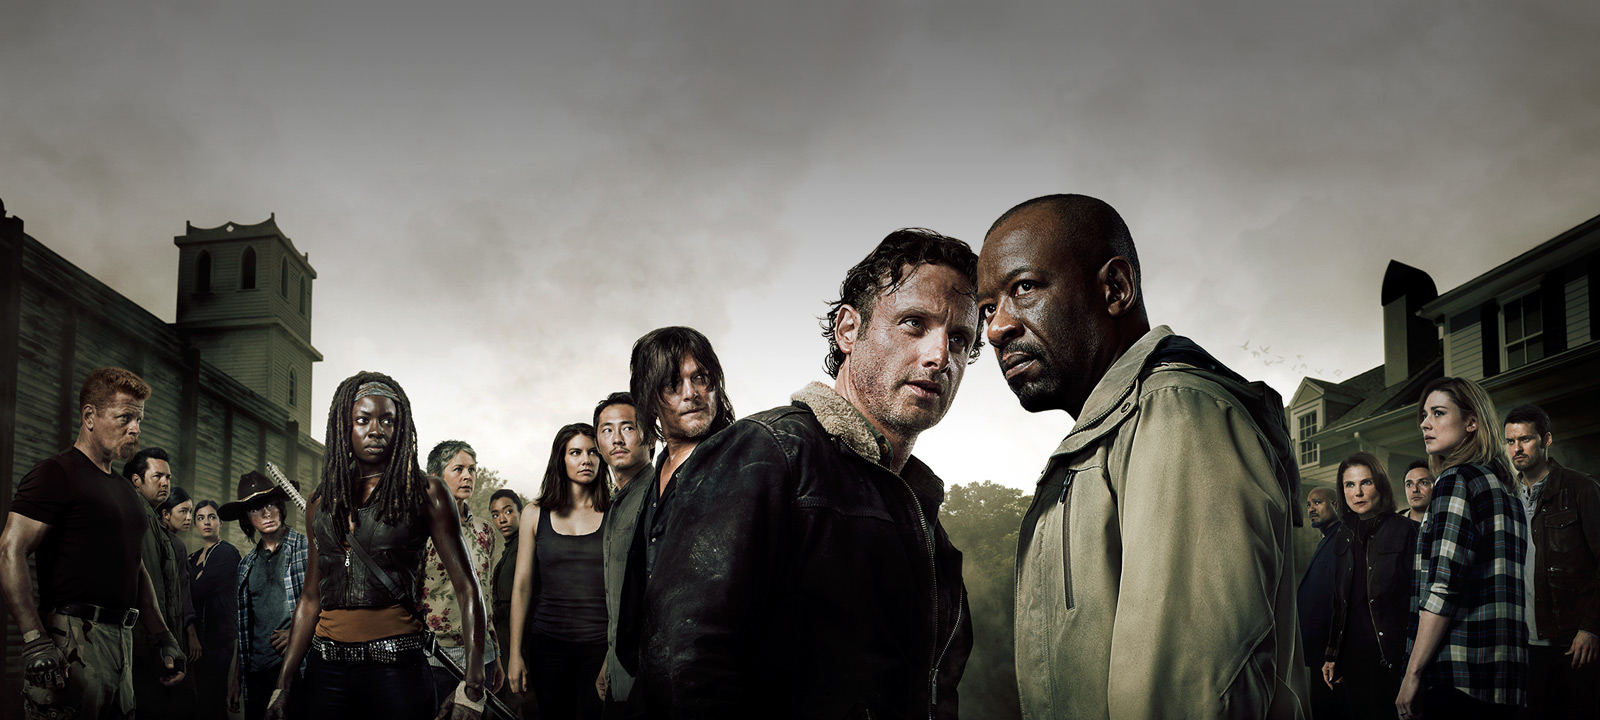 Six things the hit TV show “The Walking Dead” gets right about a post-apocalypse world